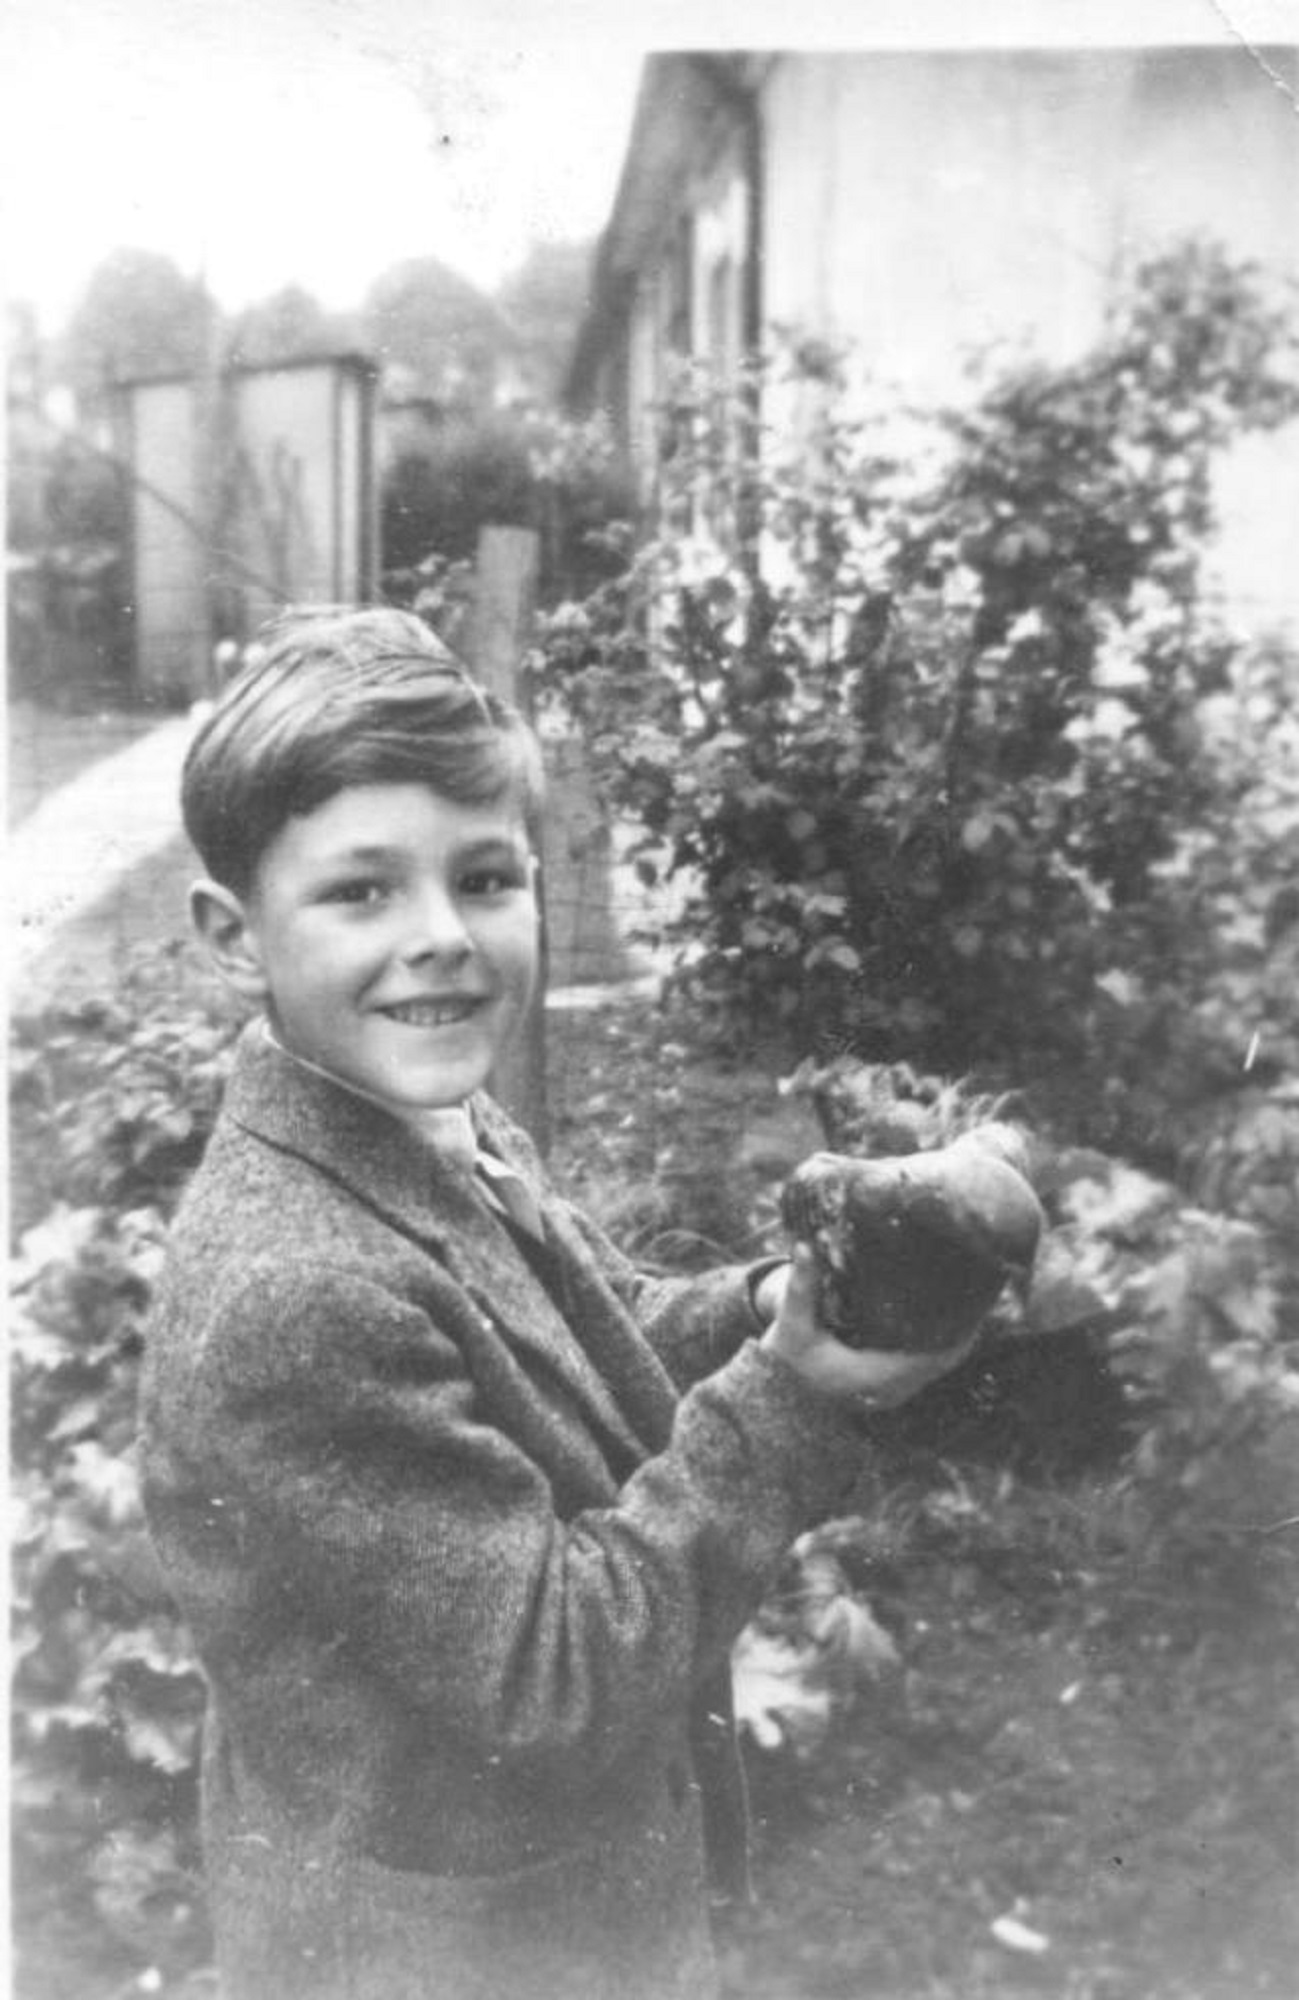 Robert holding a racing pigeon he found and restored to its owner, taken on Coronation day. Kendal Road, London NW10